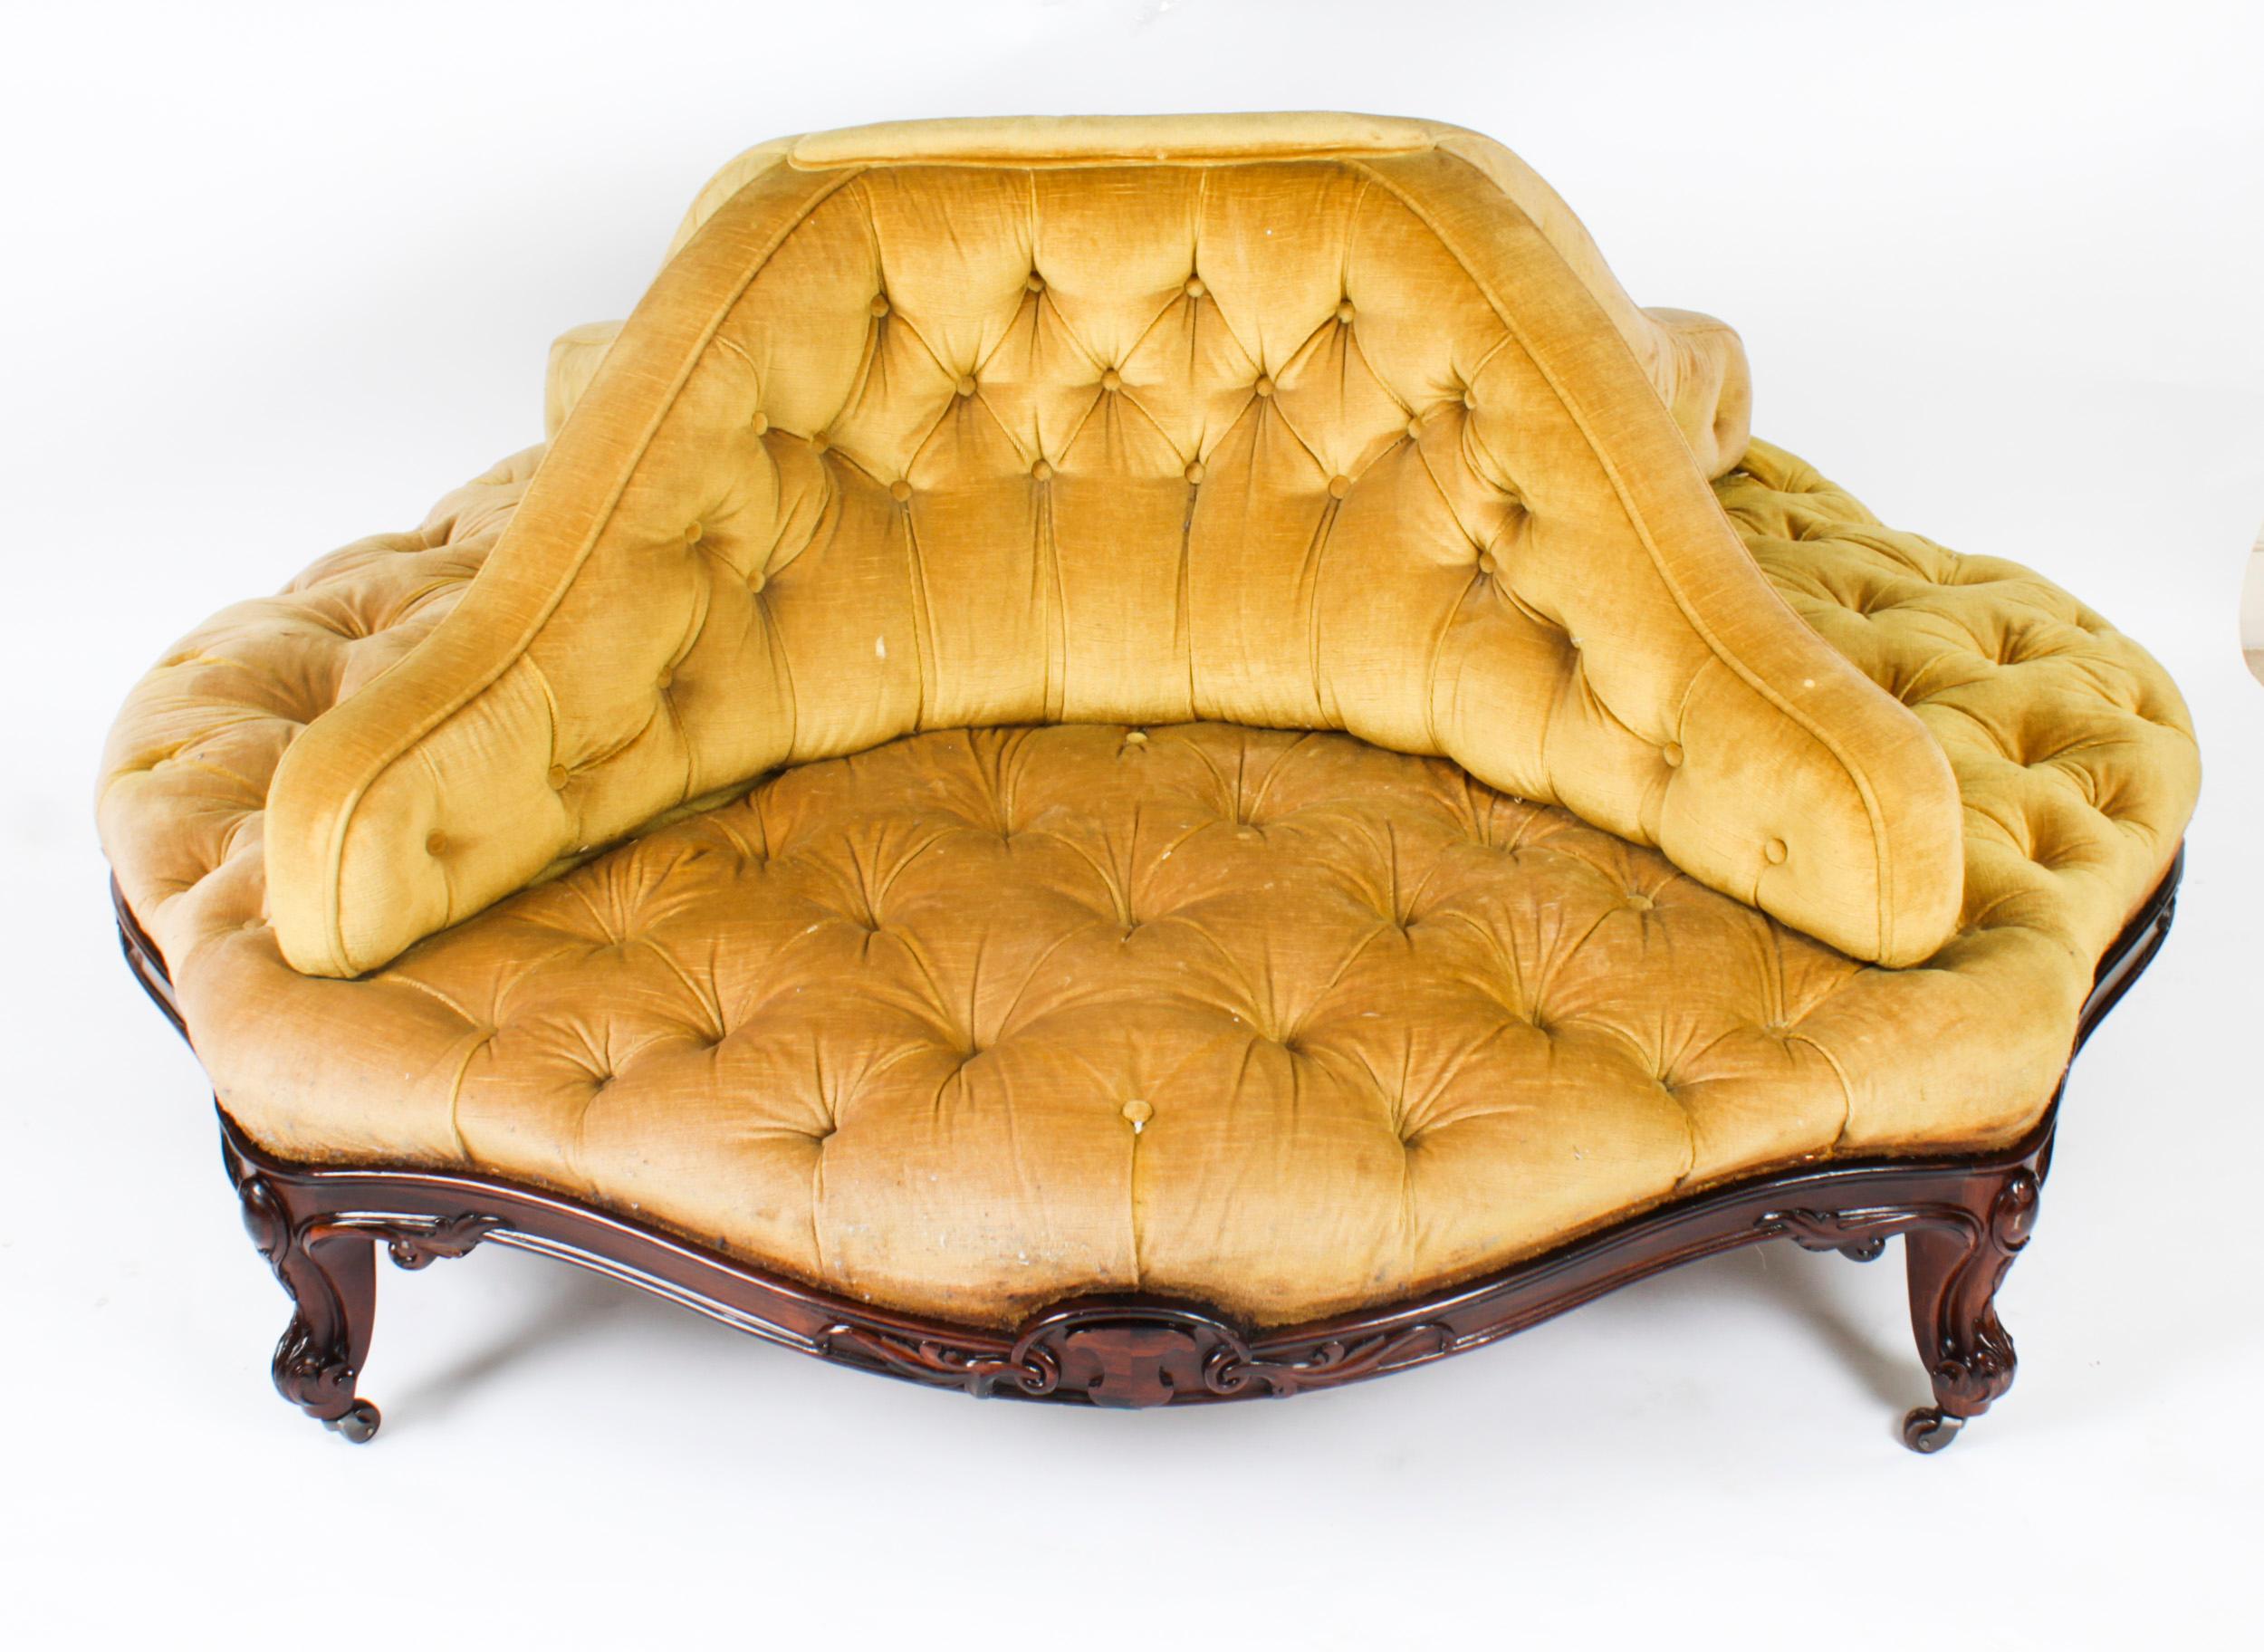 This is a fantastic English antique Victorian walnut framed conversation seat, also known as a 